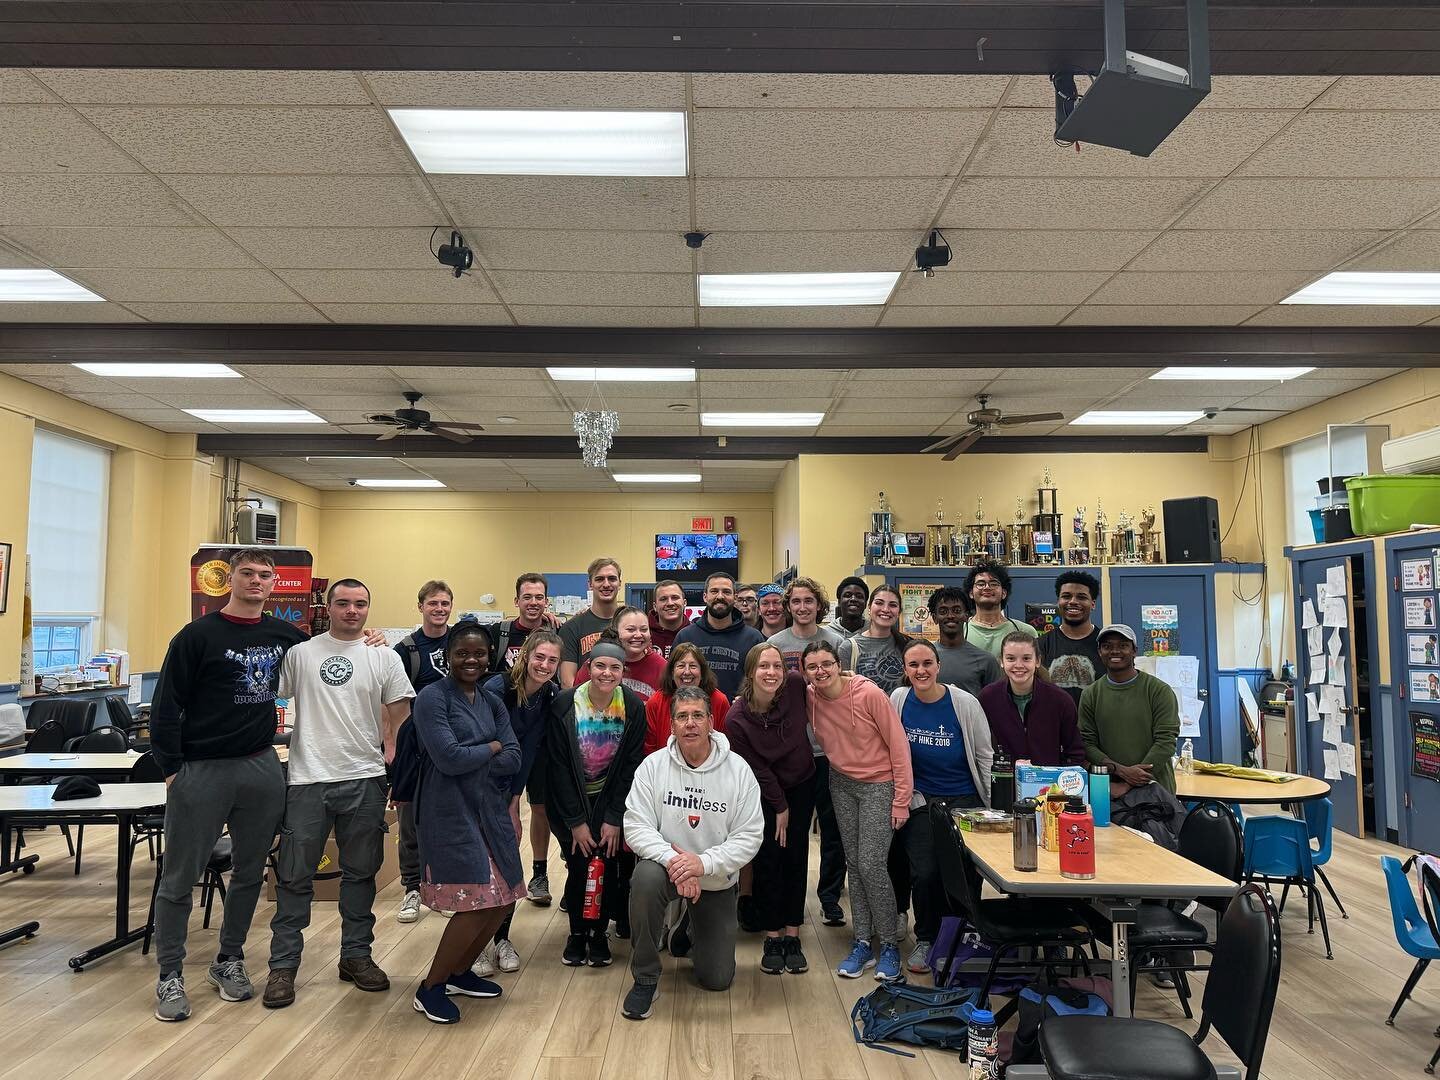 We had such a great time serving Bridge Community Church and the Easton Area Community Center this past Friday for this year&rsquo;s Spring Break Service Project! It was such a great way to meet new friends from Muhlenberg DCF and show the love of Ch